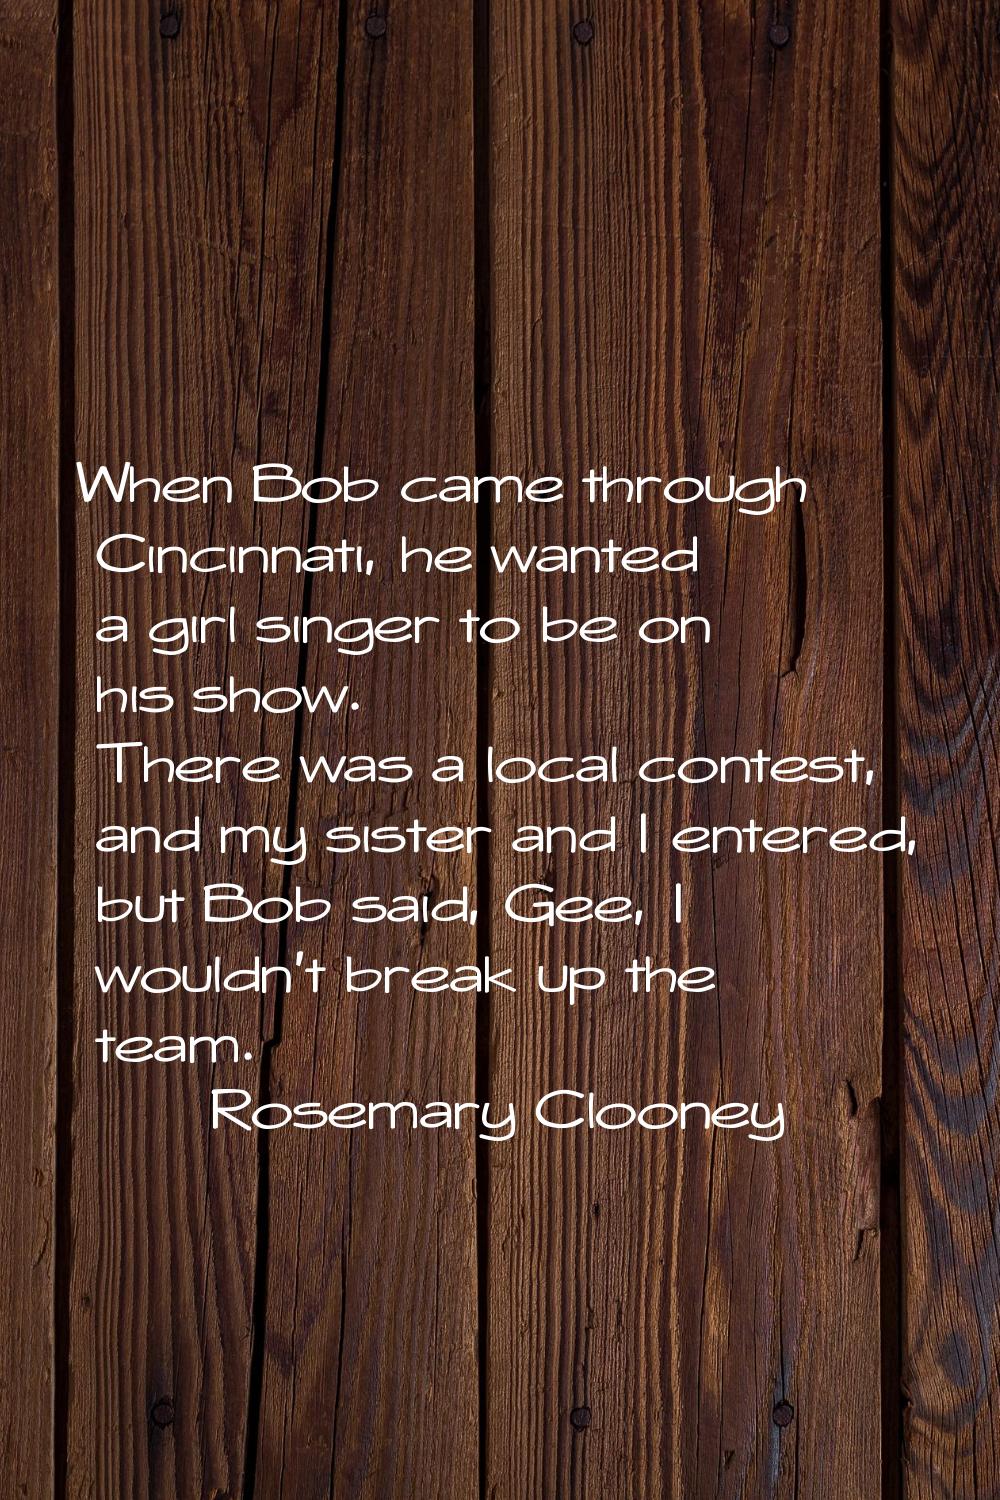 When Bob came through Cincinnati, he wanted a girl singer to be on his show. There was a local cont